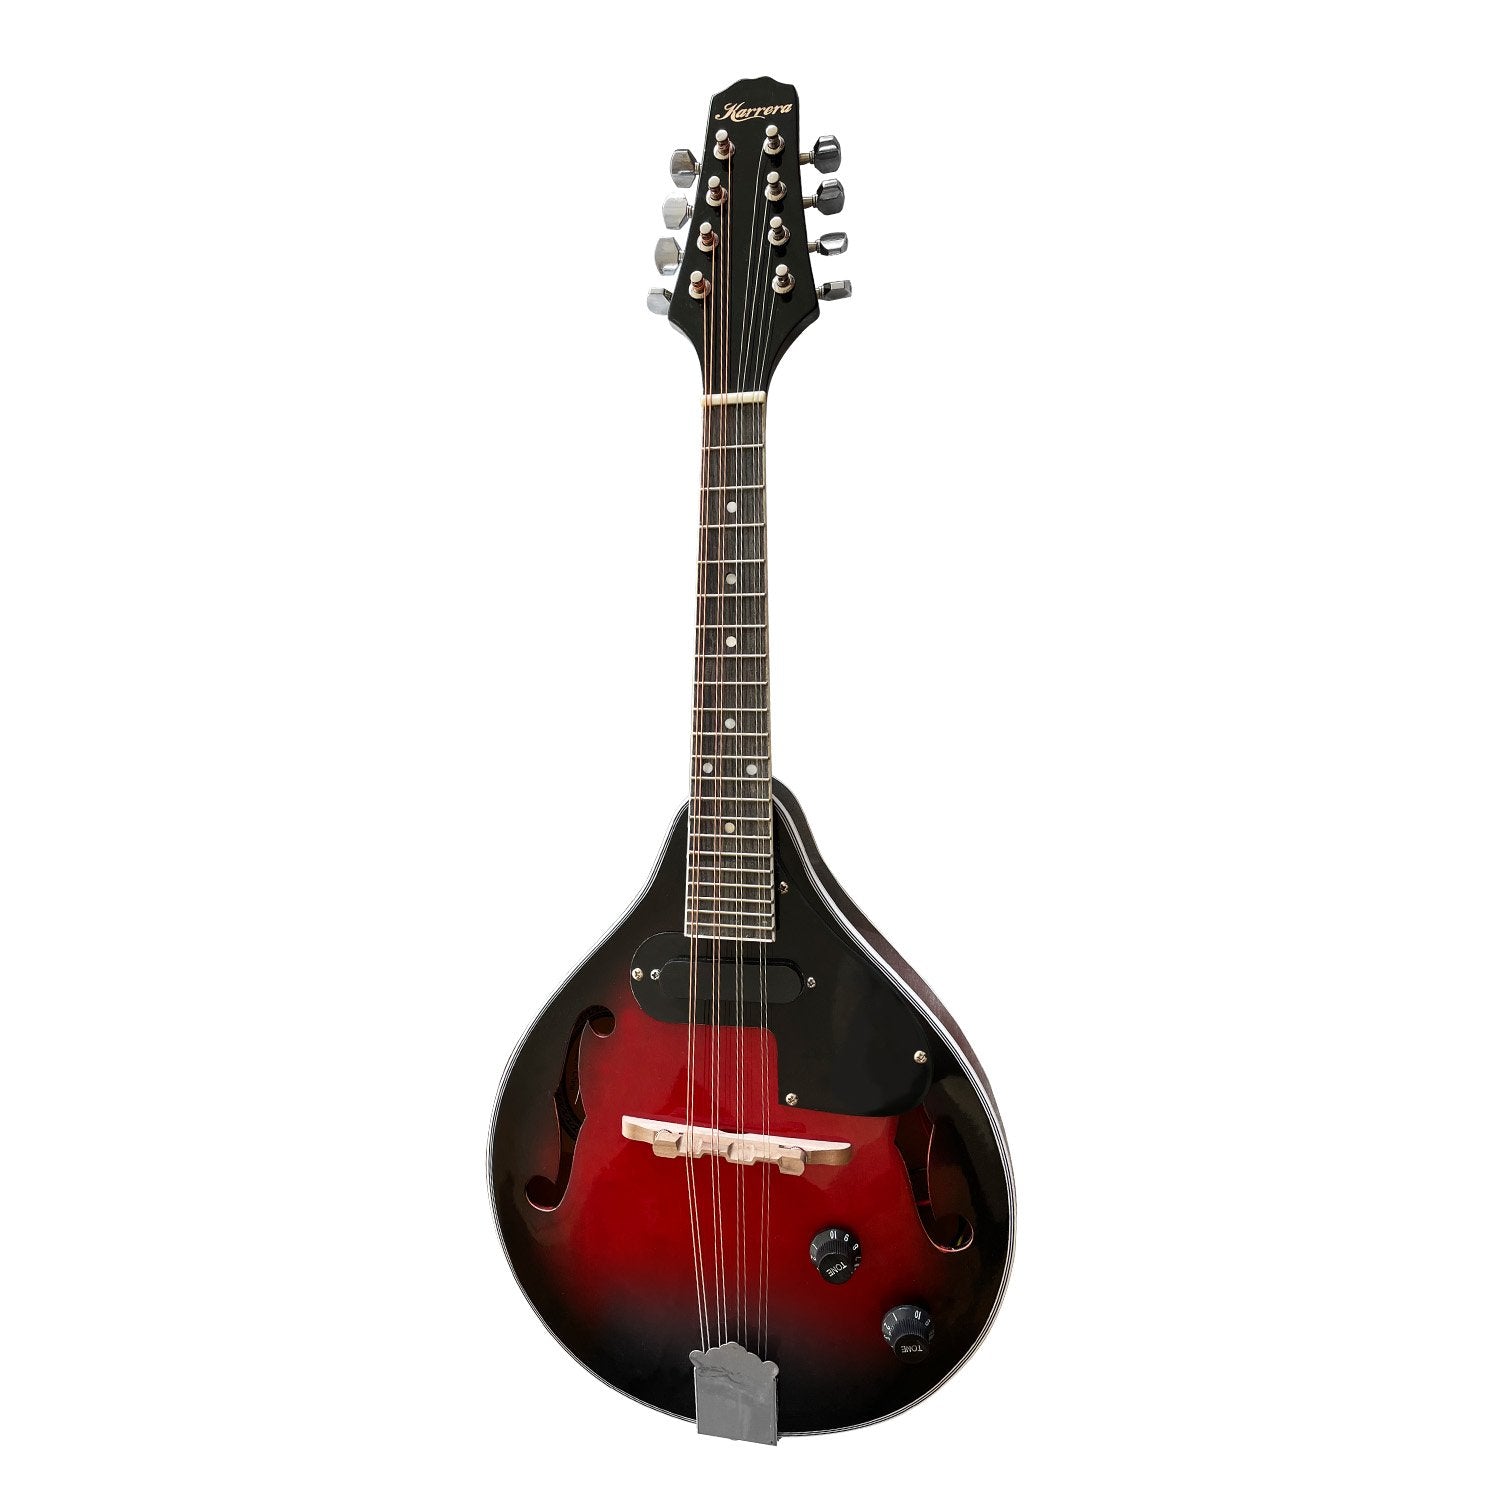 8-String Electric Mandolin, High-Gloss Finish, with Accessories